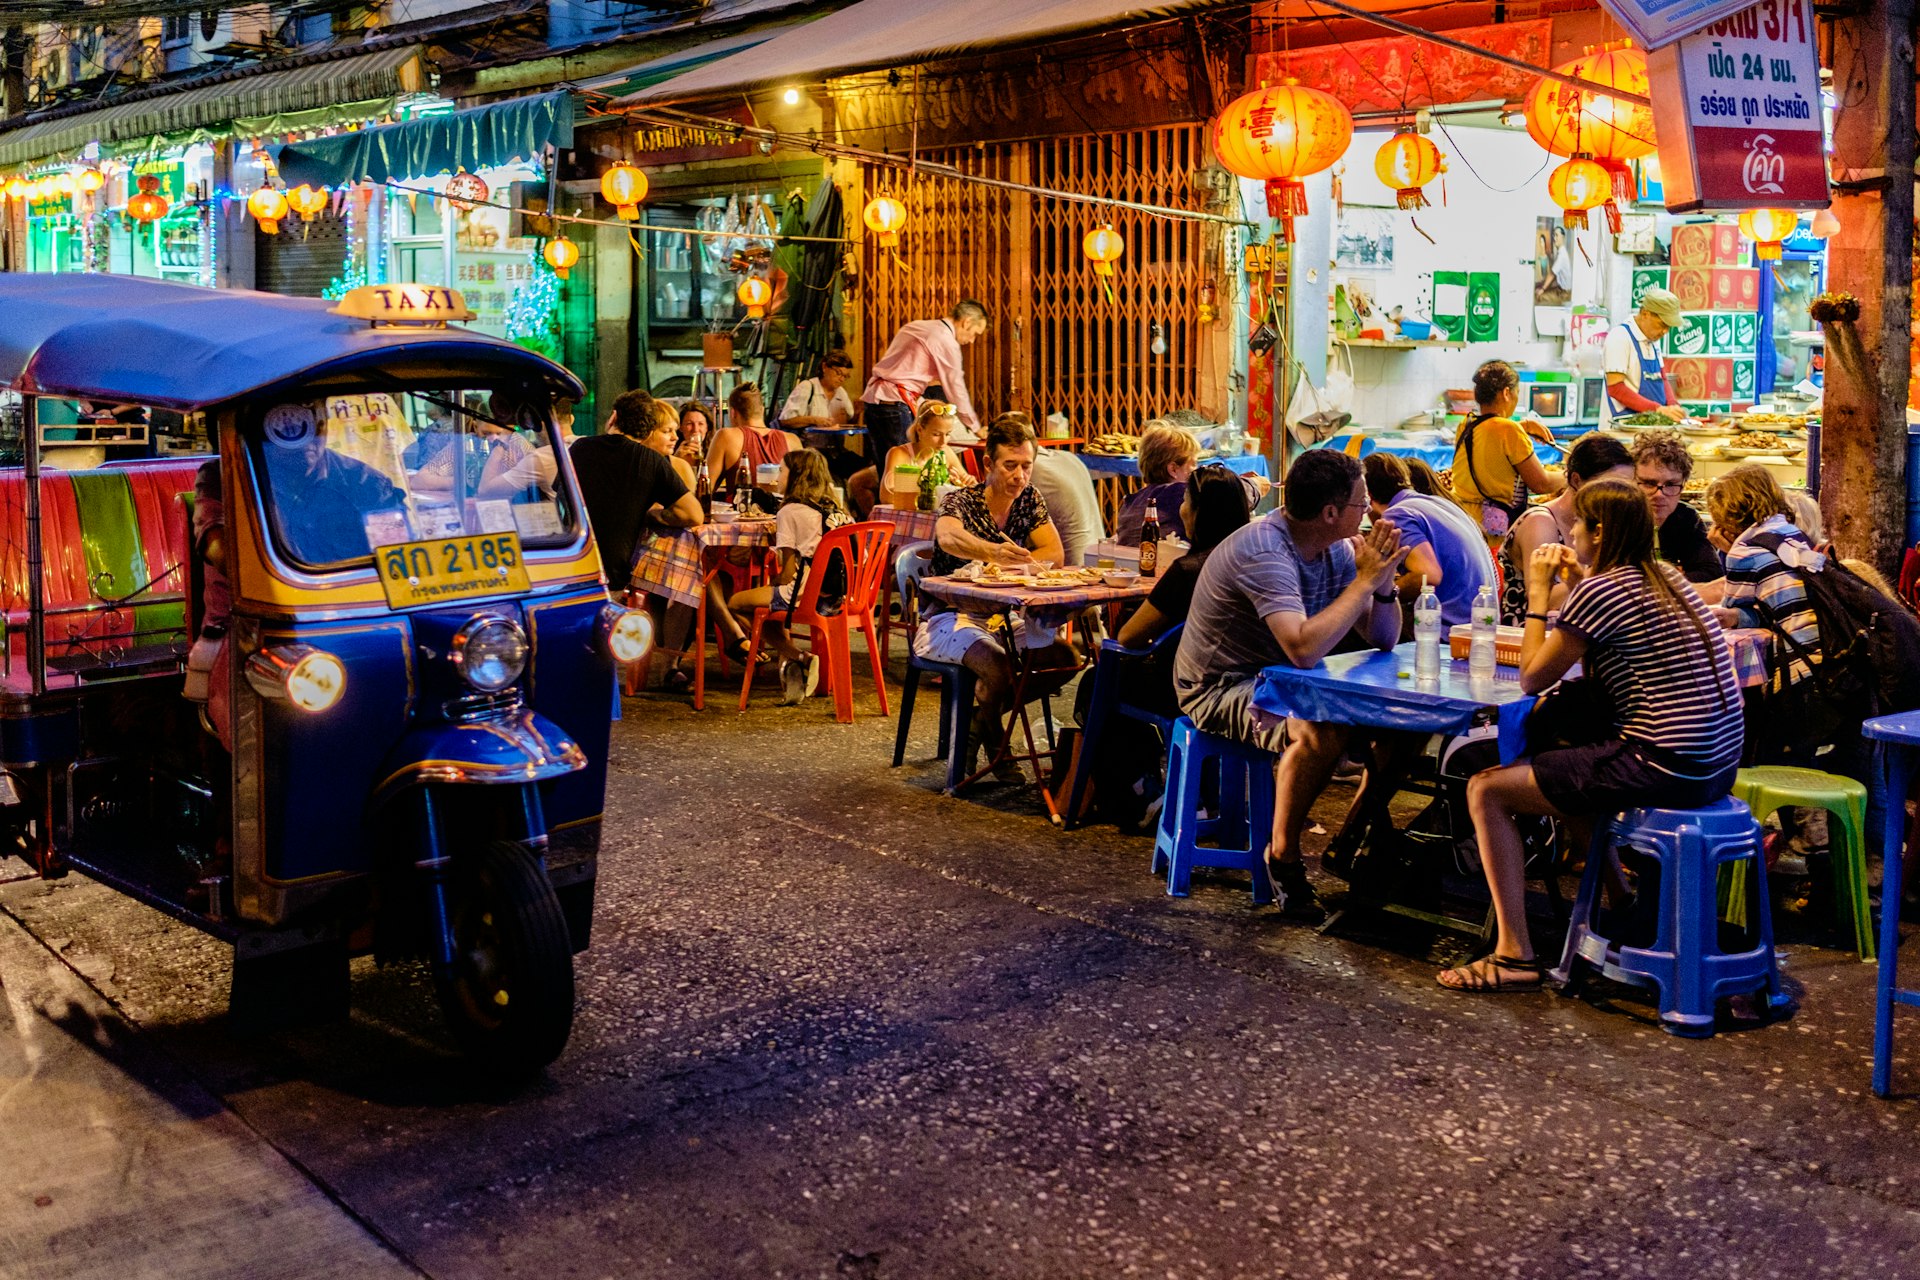 People sit at outside tables enjoying street food meals